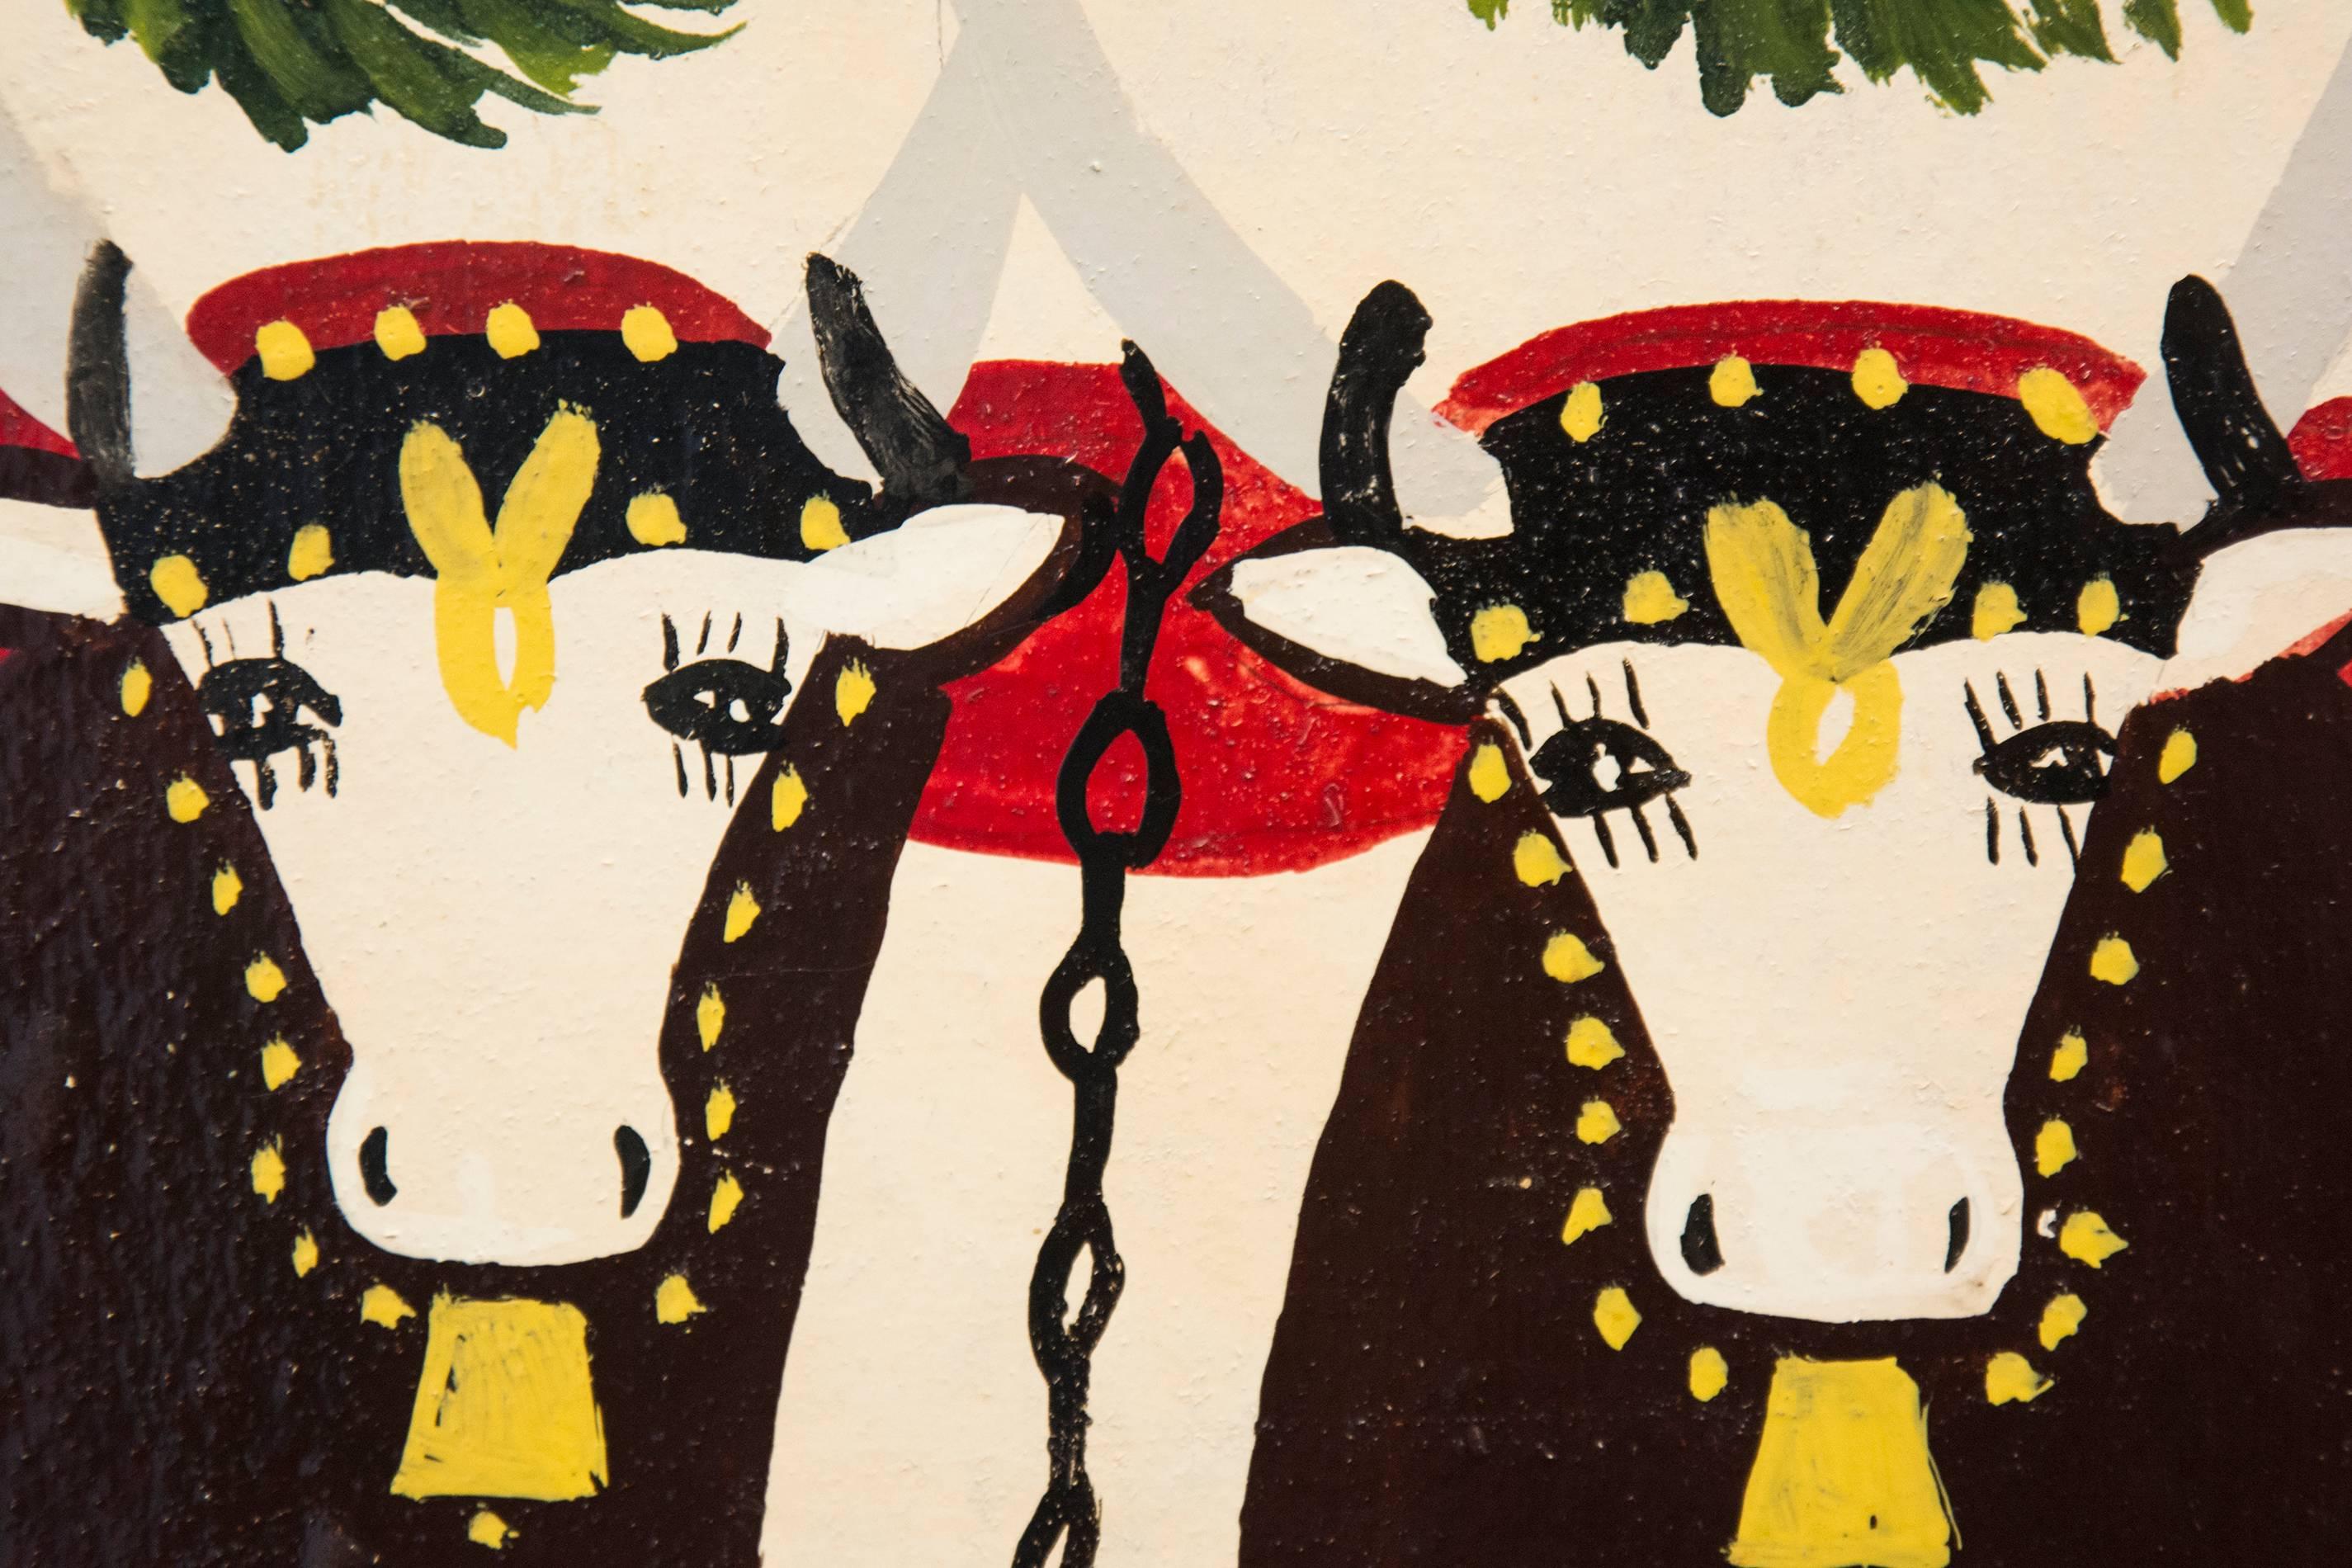 Two Oxen in Winter - Beige Animal Painting by Maud Lewis